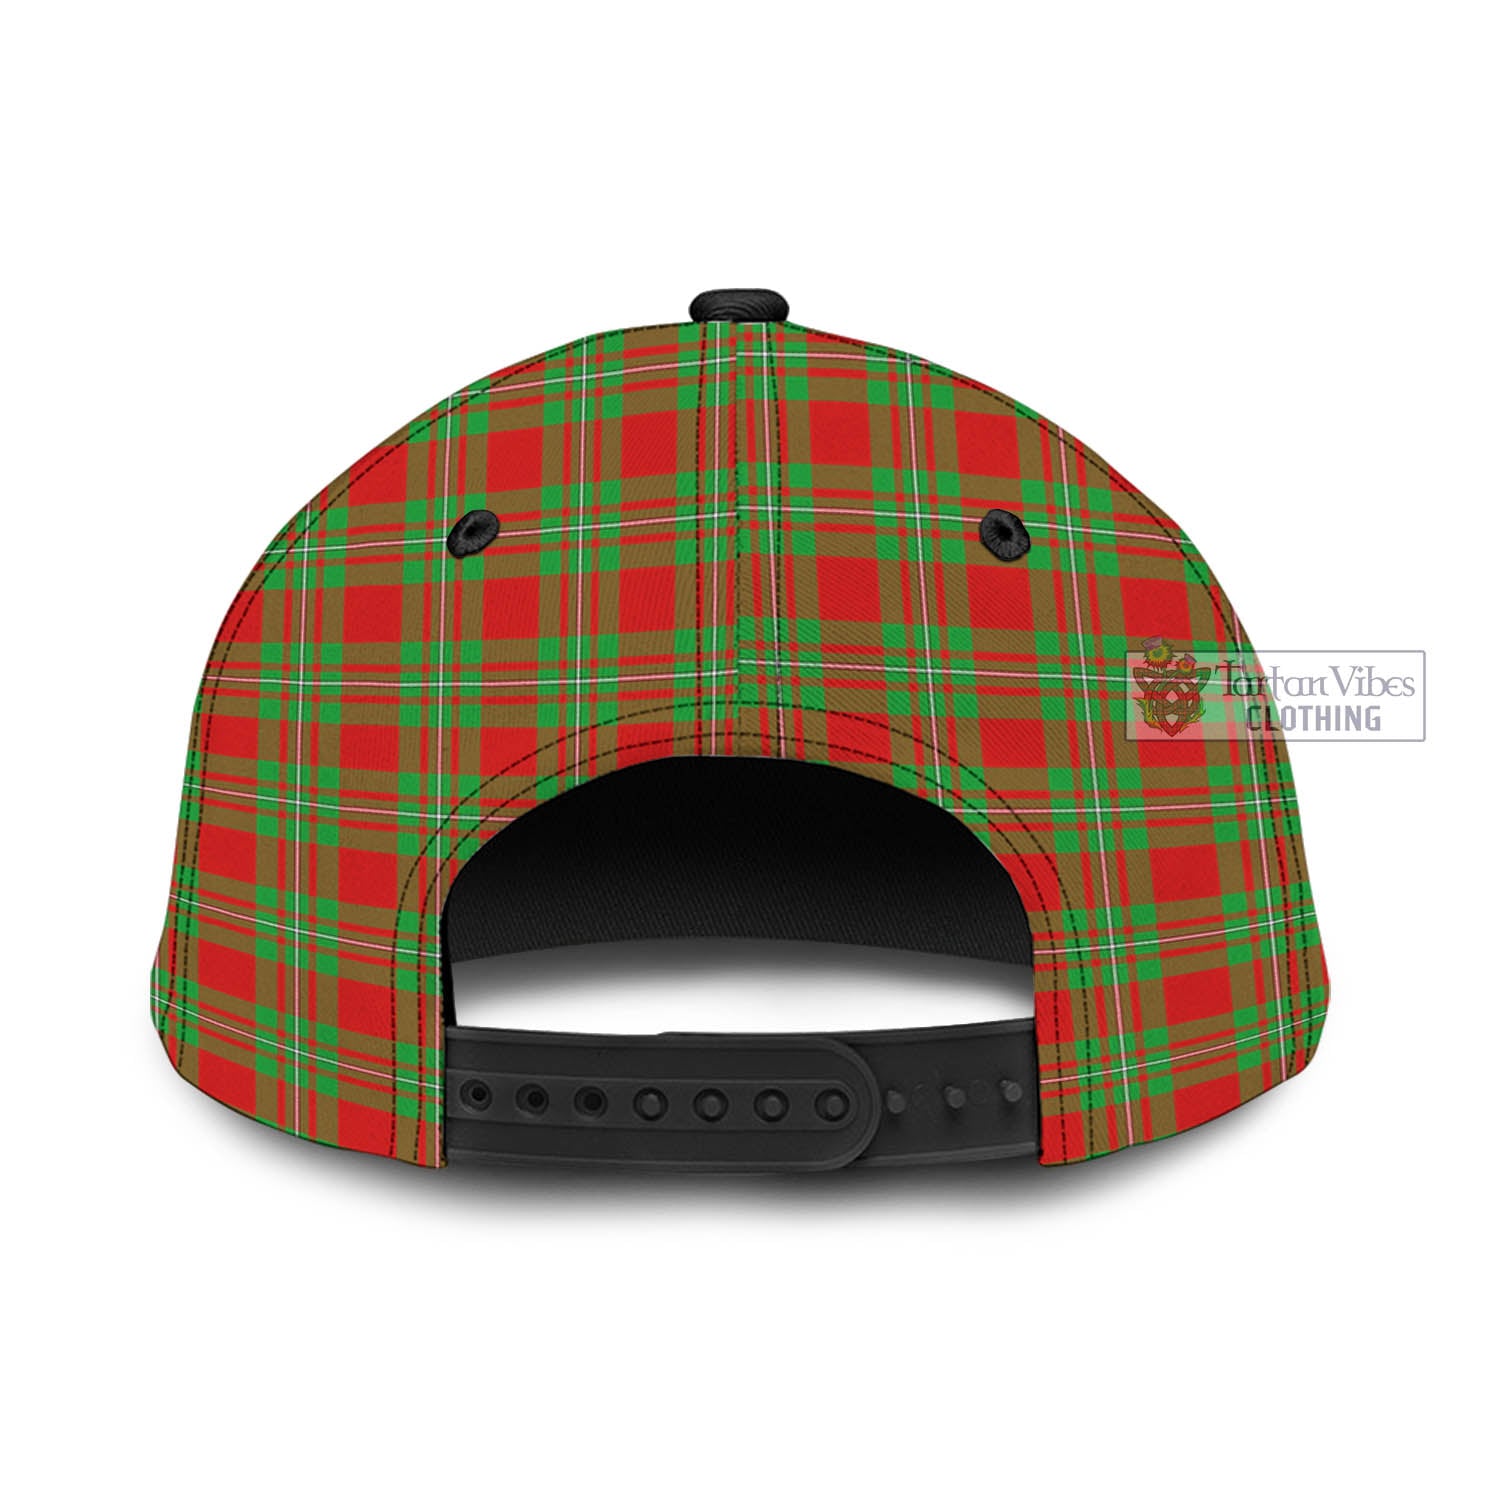 Tartan Vibes Clothing Grierson Tartan Classic Cap with Family Crest In Me Style